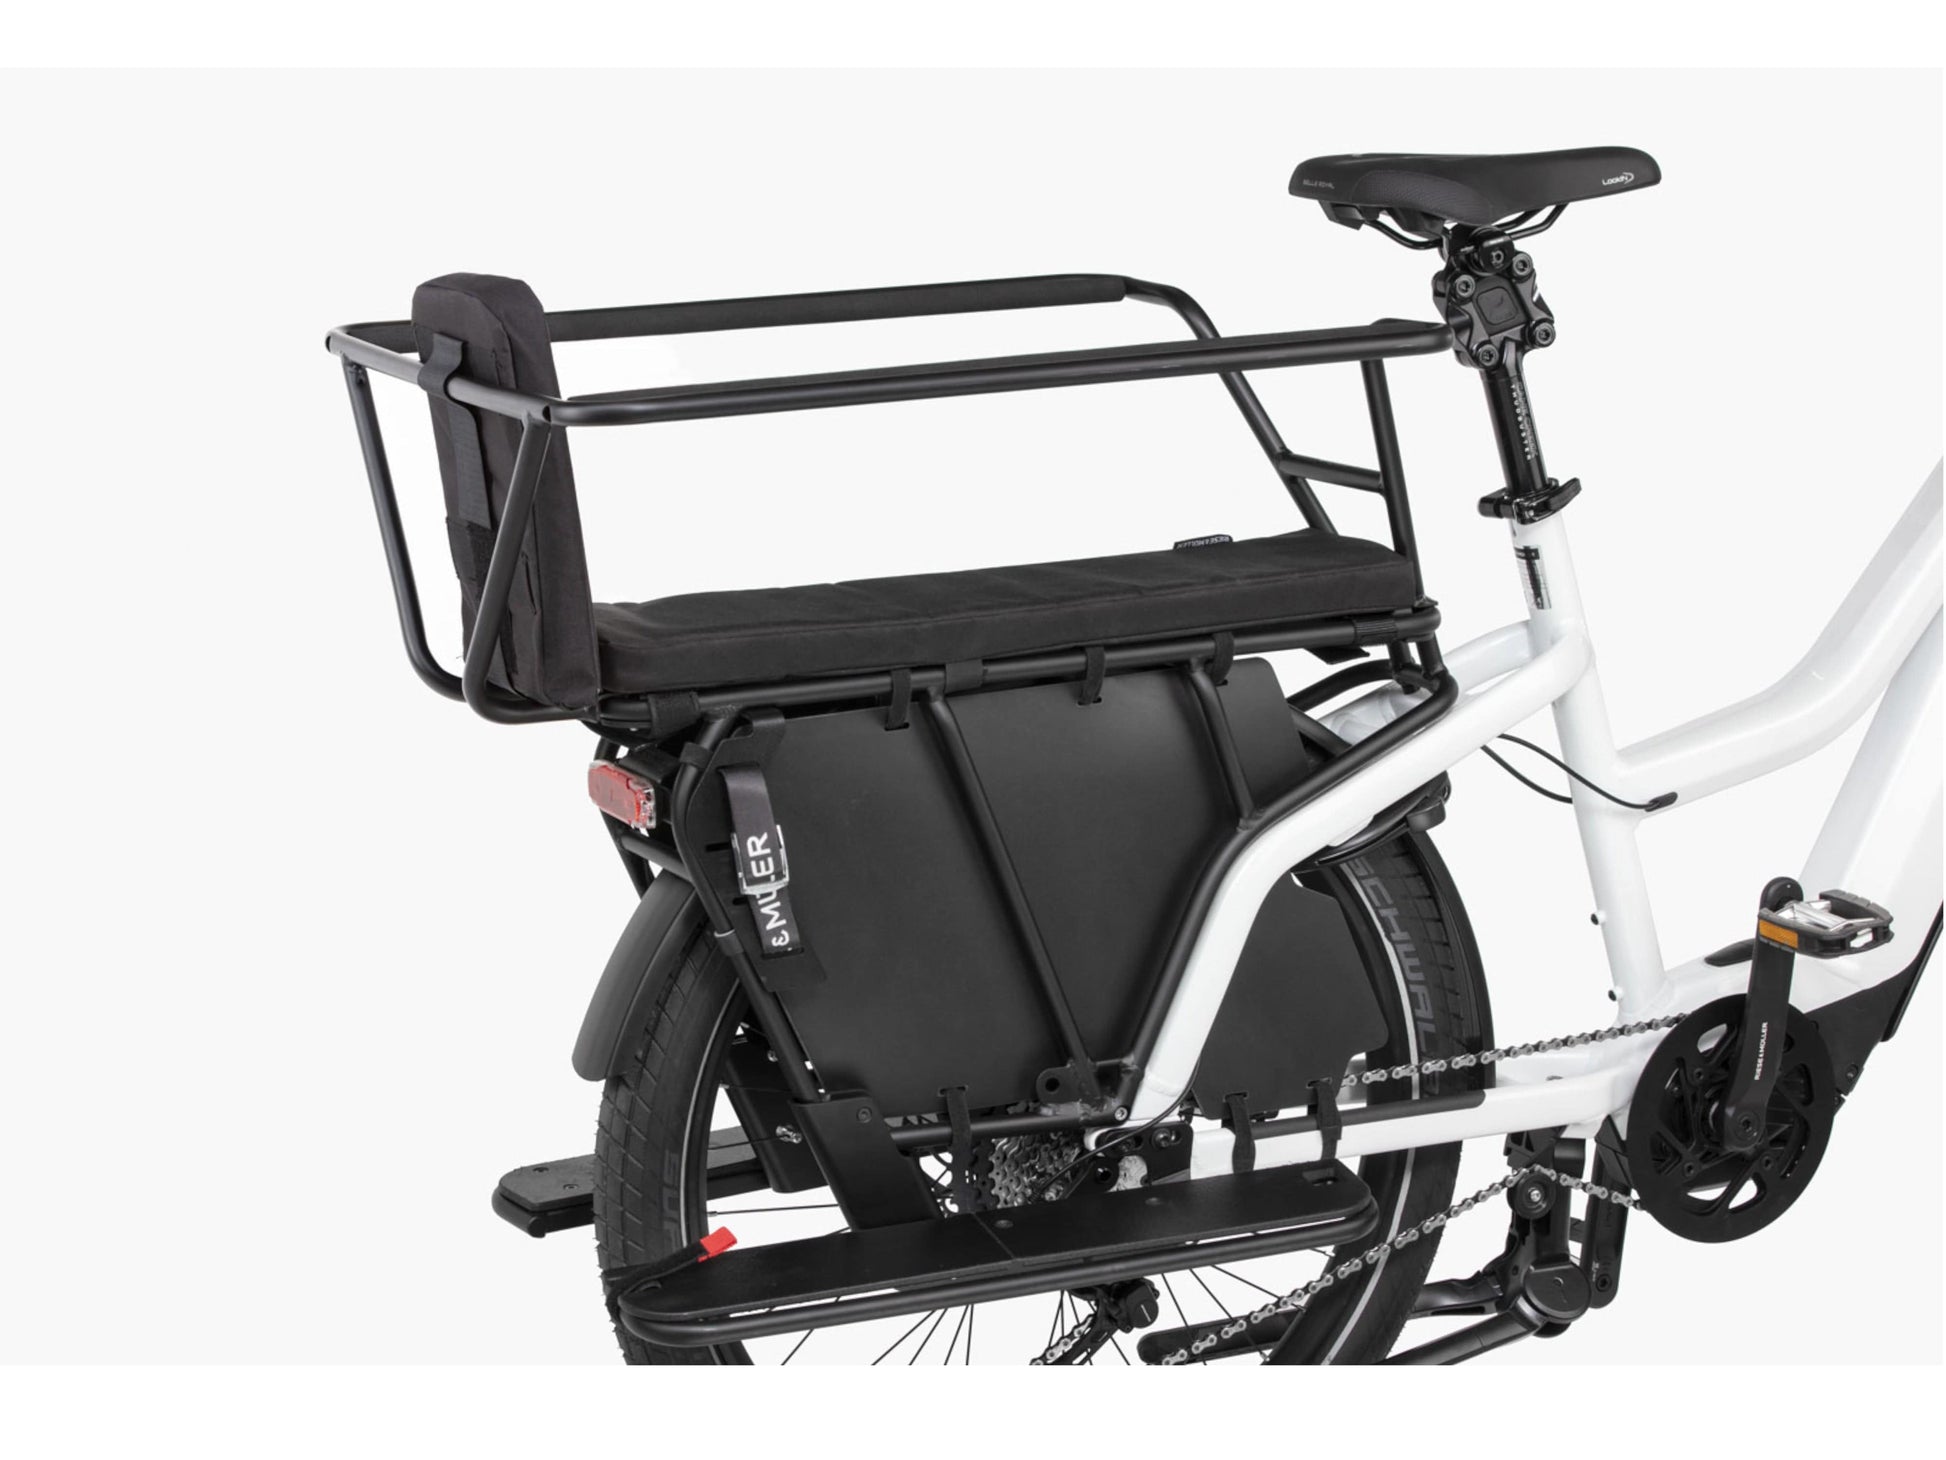 Riese and Muller Multicharger Mixte GT Touring 750 emtb hardtail closeup rear carrier passenger safety kit option